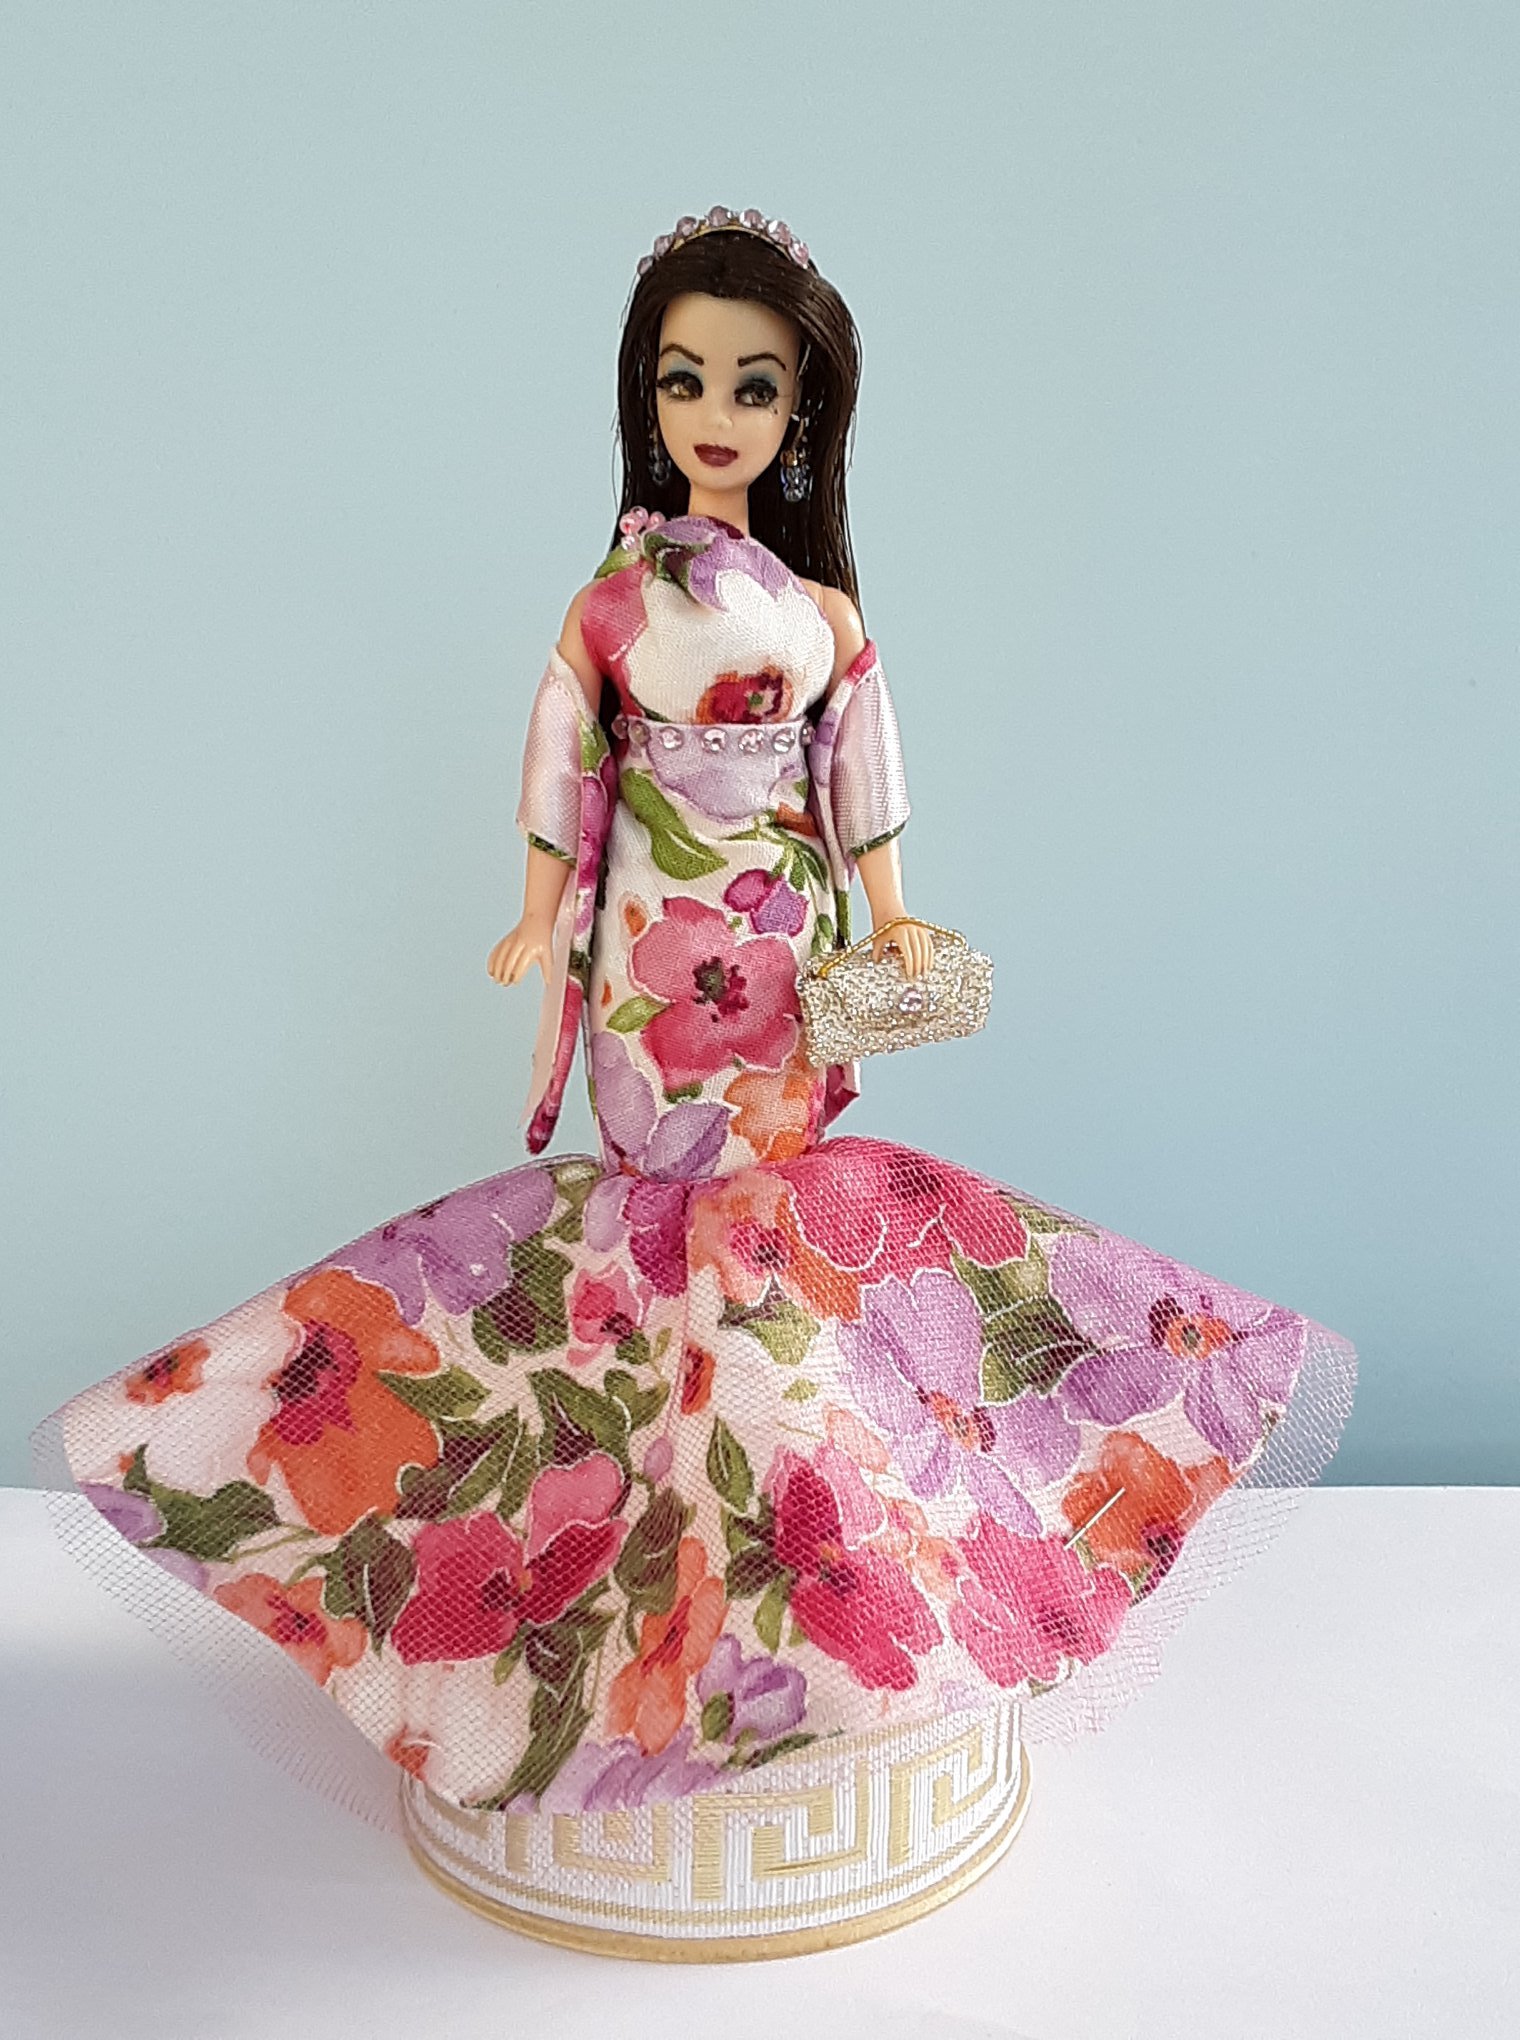 Handmade OOAK Dawn Doll Dresses and Accessories